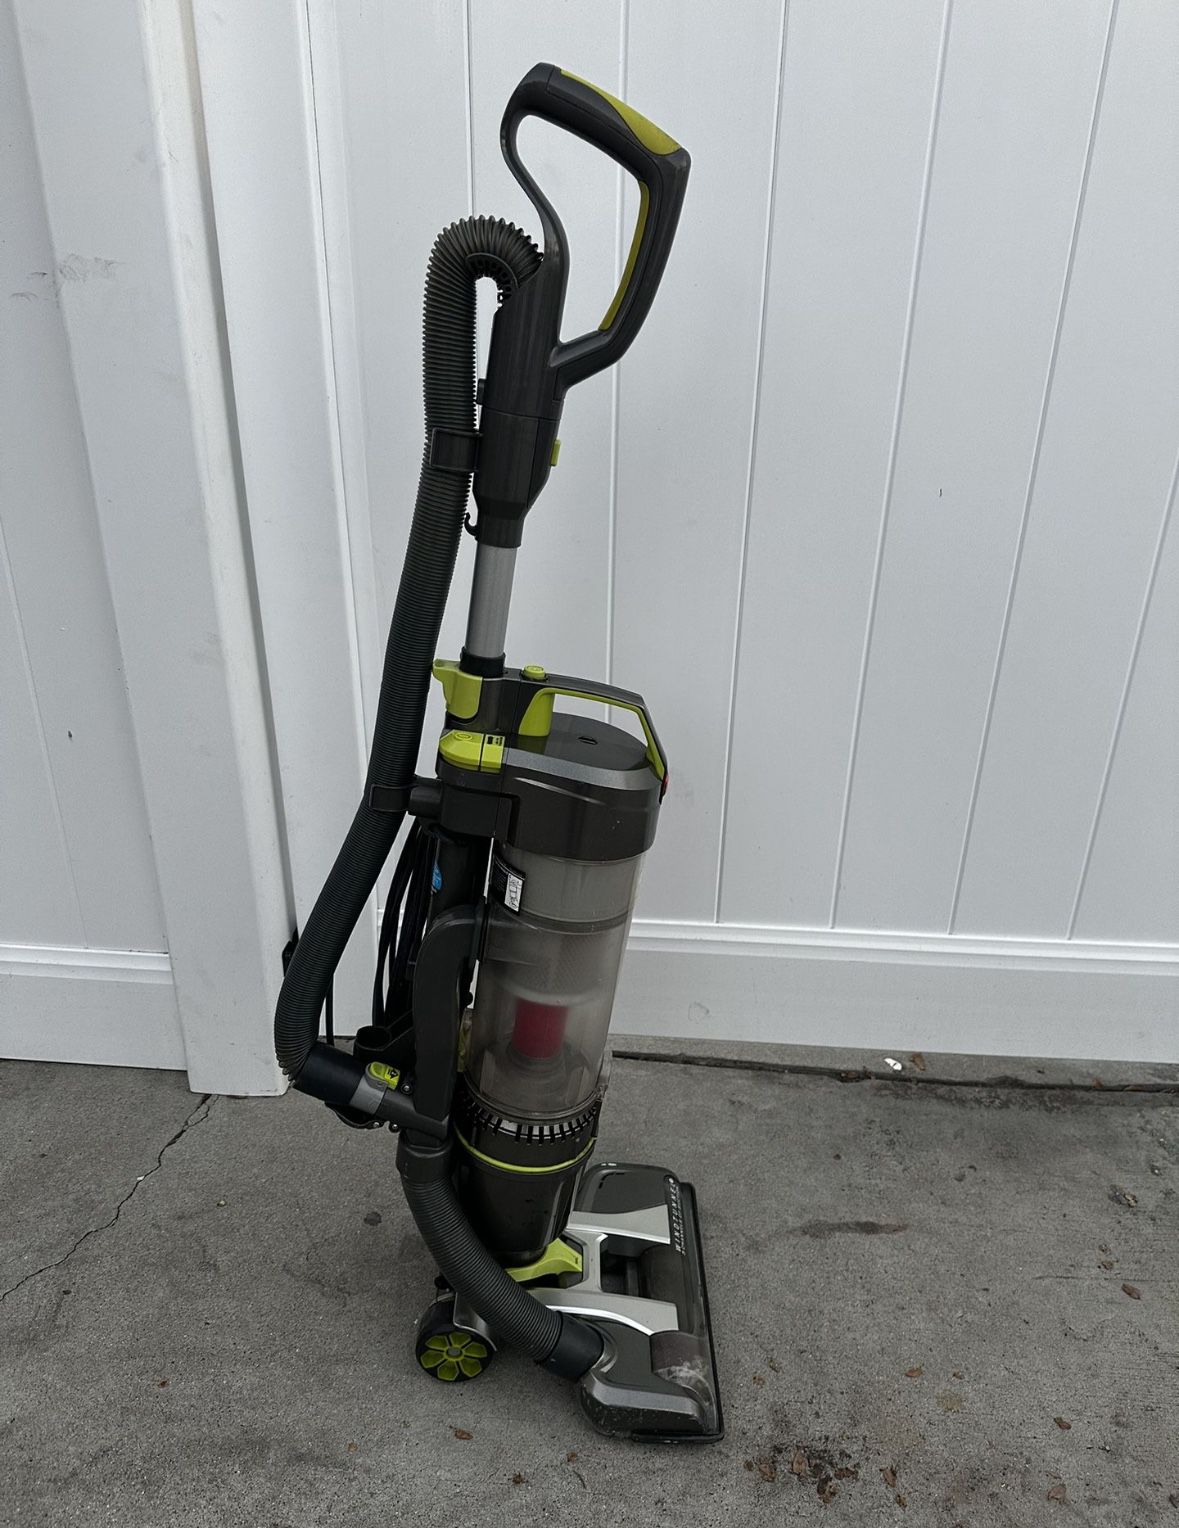 Black and Decker AIRSWIVEL Vacuum BDASV104 for Sale in Upland, CA - OfferUp